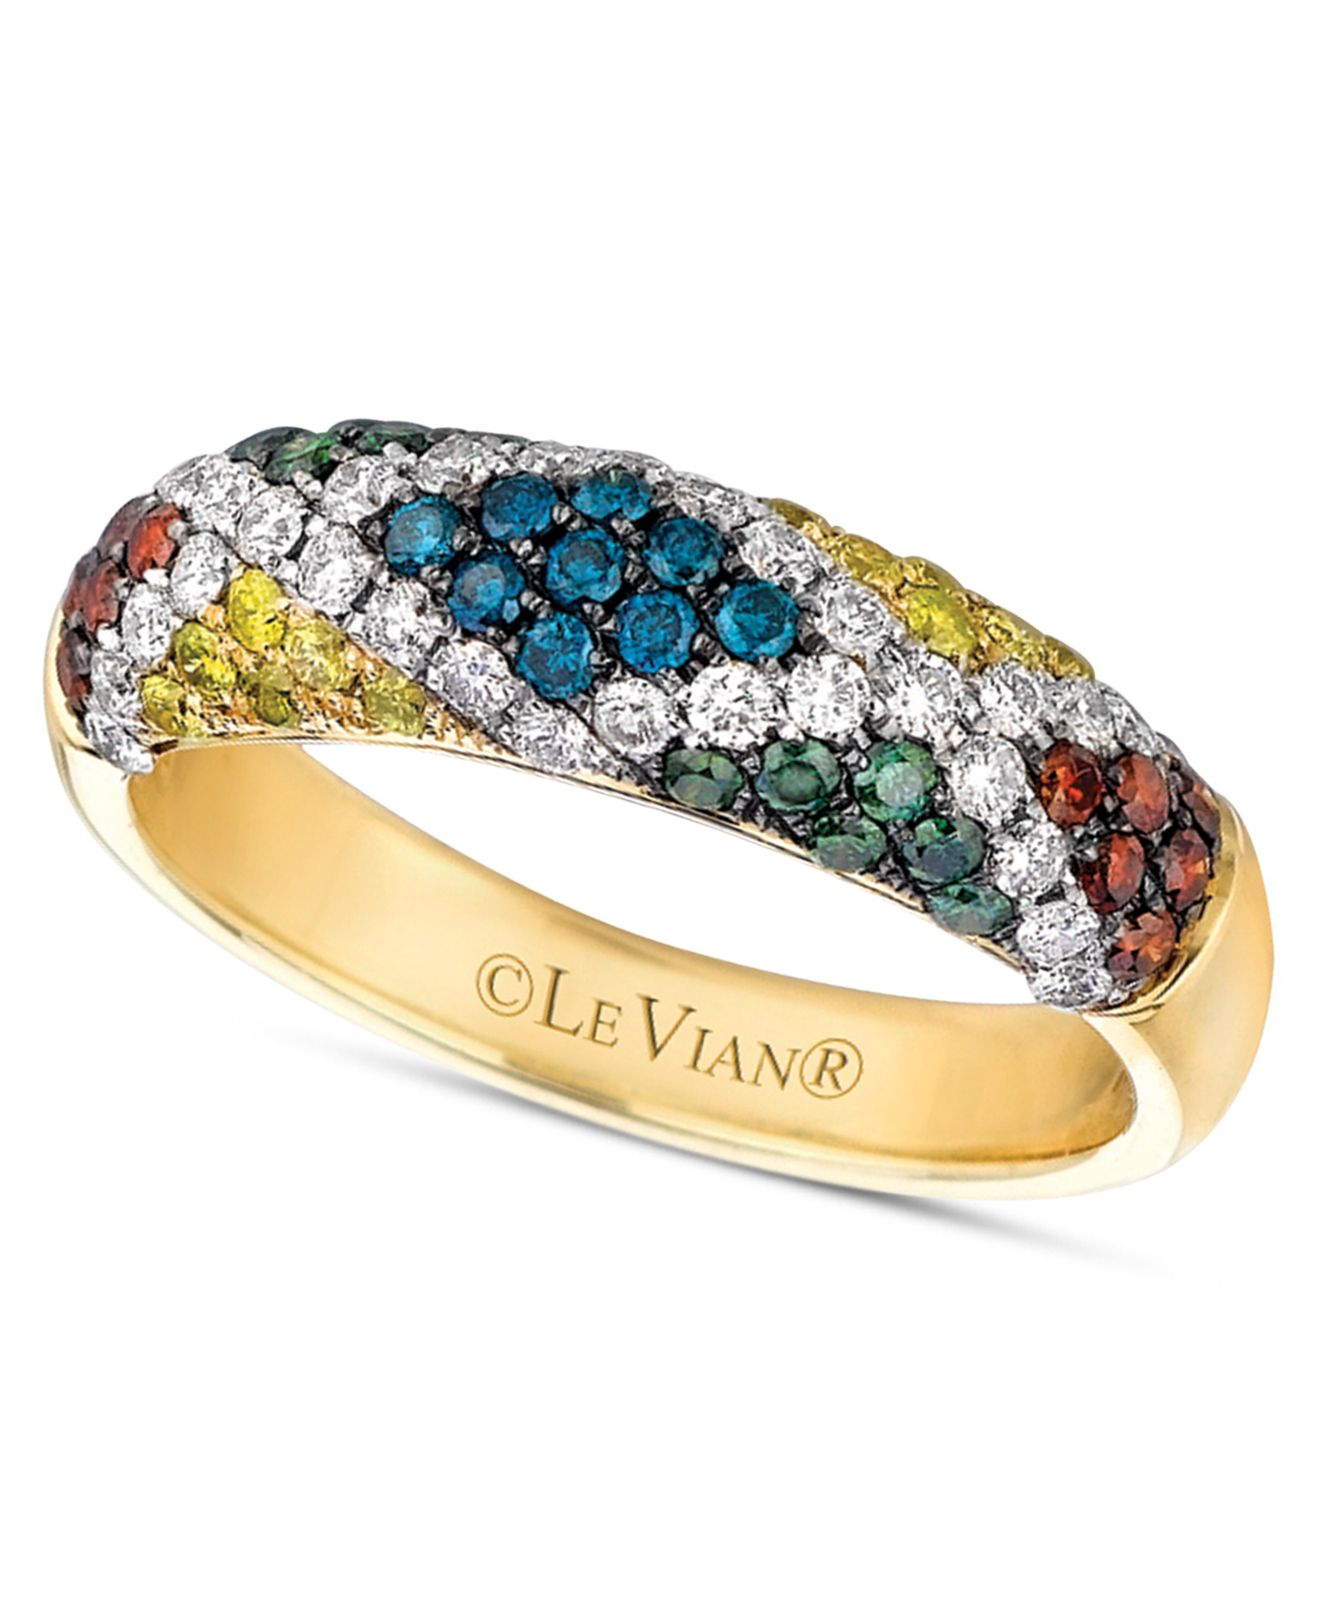 Lyst Le Vian Mixberry Diamond Patterned Skinny Ring 910 Ct Tw in 14k